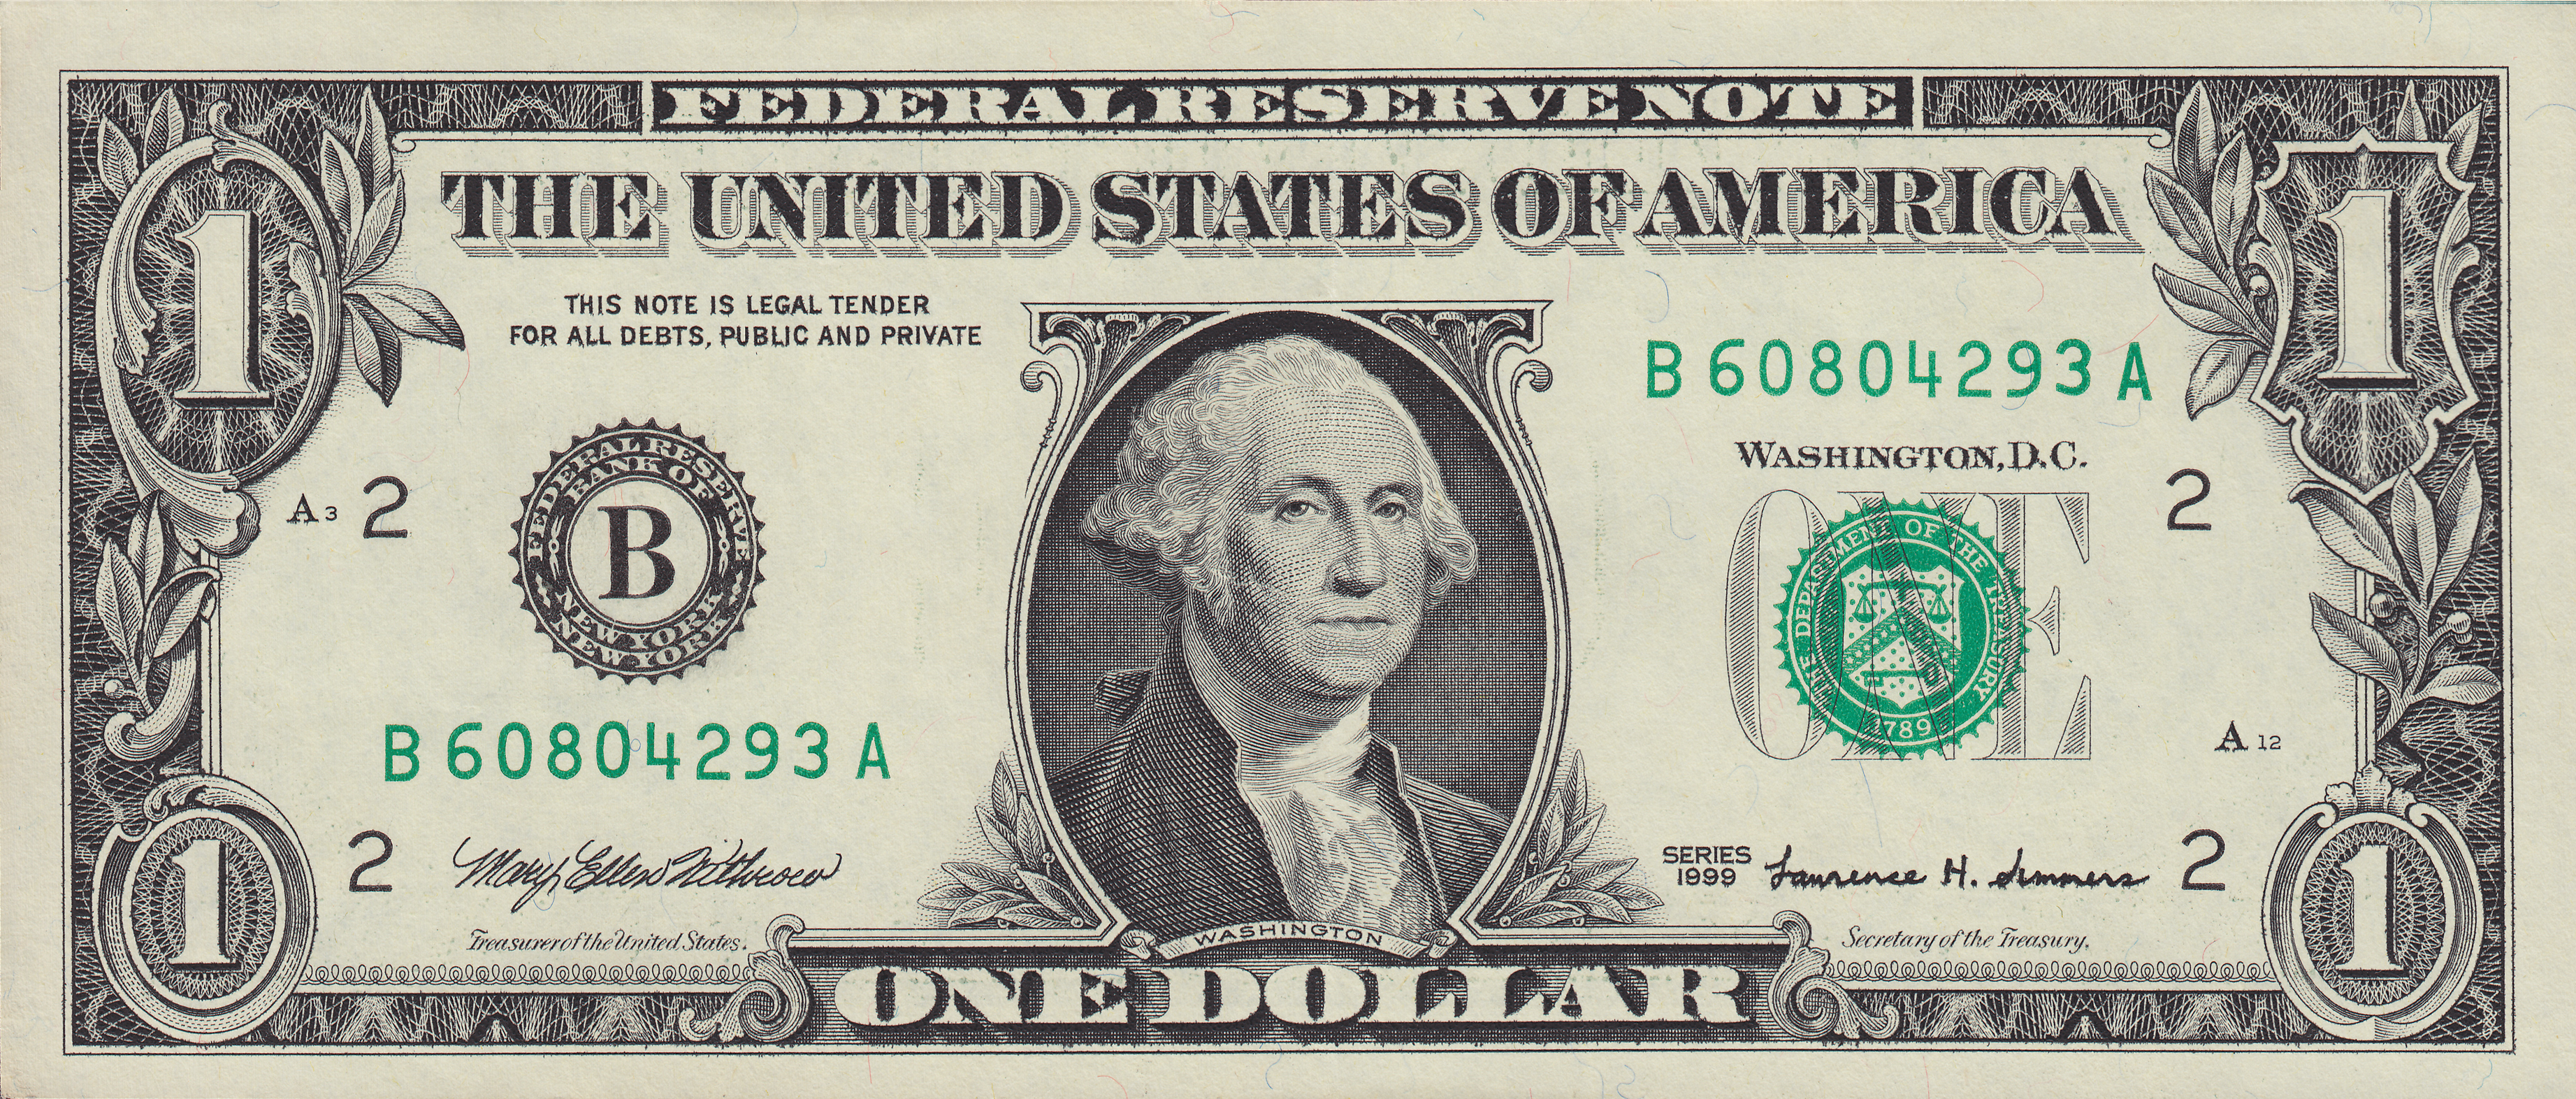 U.S. First President George Washington featured on the obverse of the one dollar note.